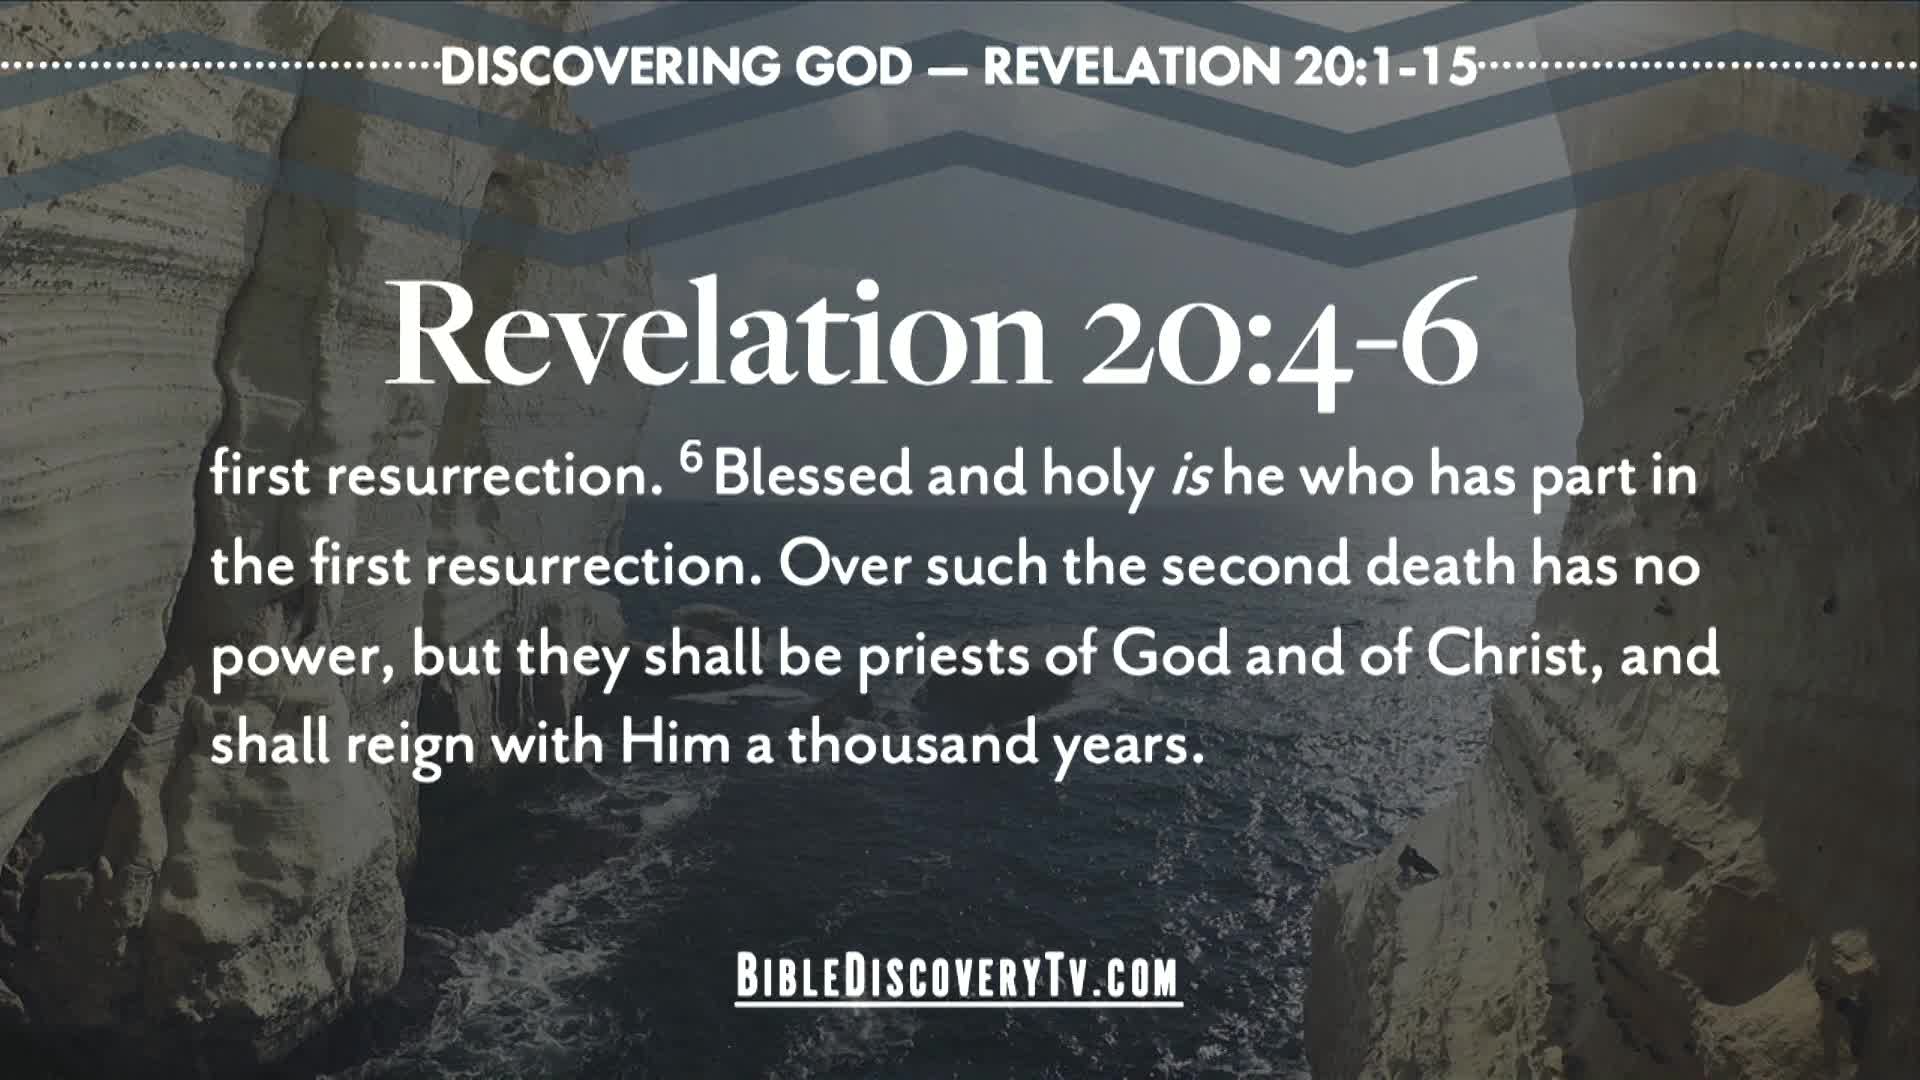 Bible Discovery - Revelation 20 Satans Last Stand